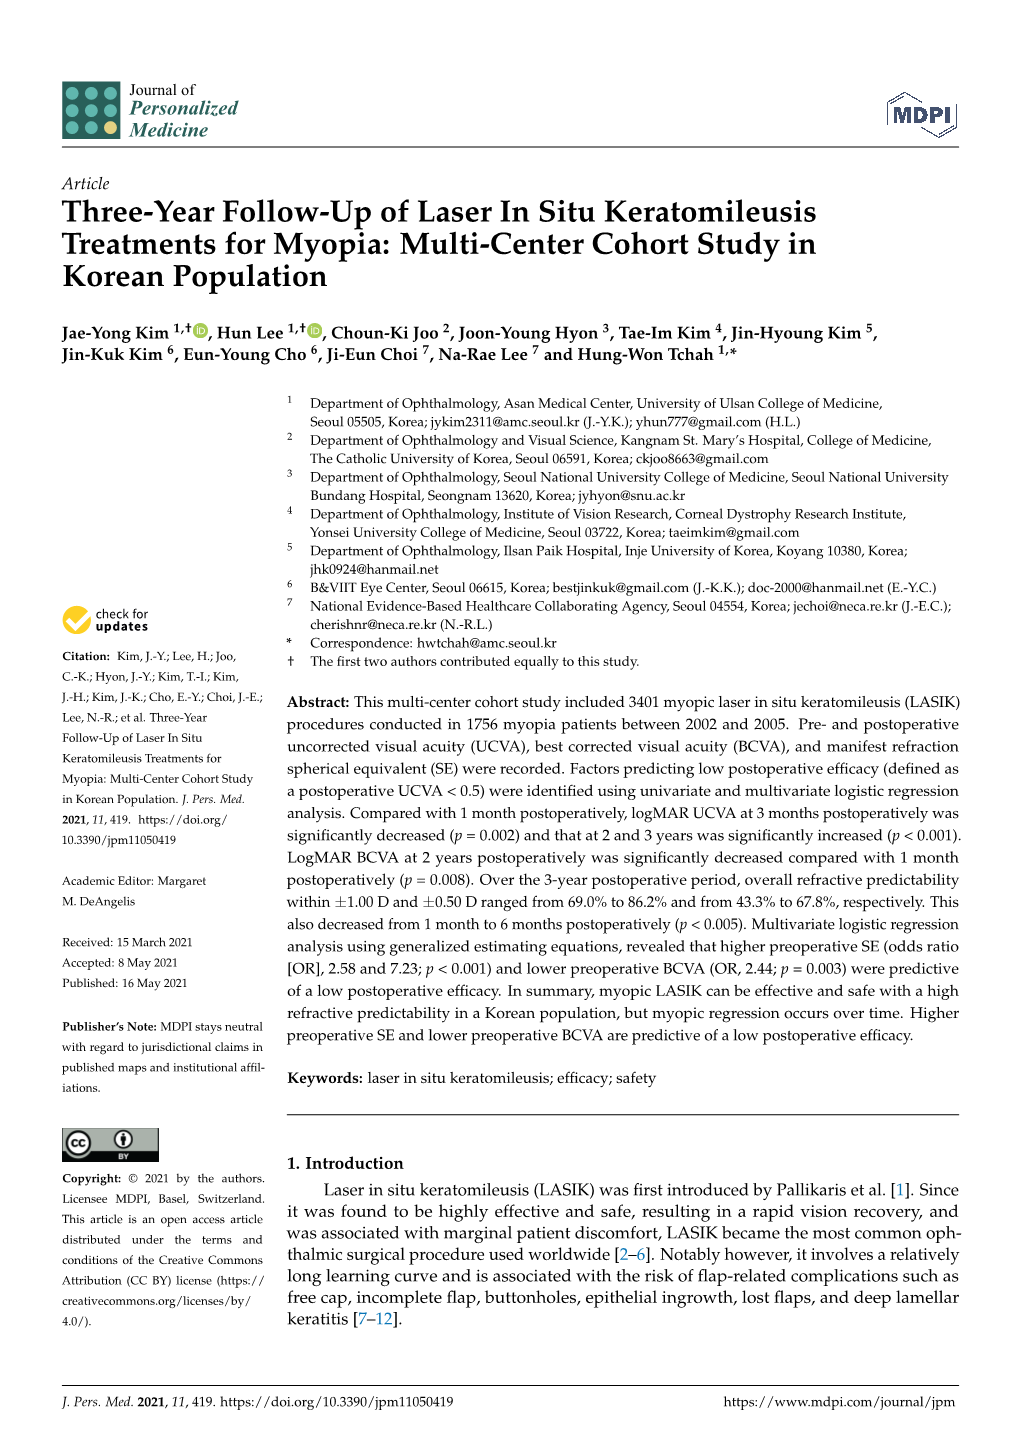 Three-Year Follow-Up of Laser in Situ Keratomileusis Treatments for Myopia: Multi-Center Cohort Study in Korean Population